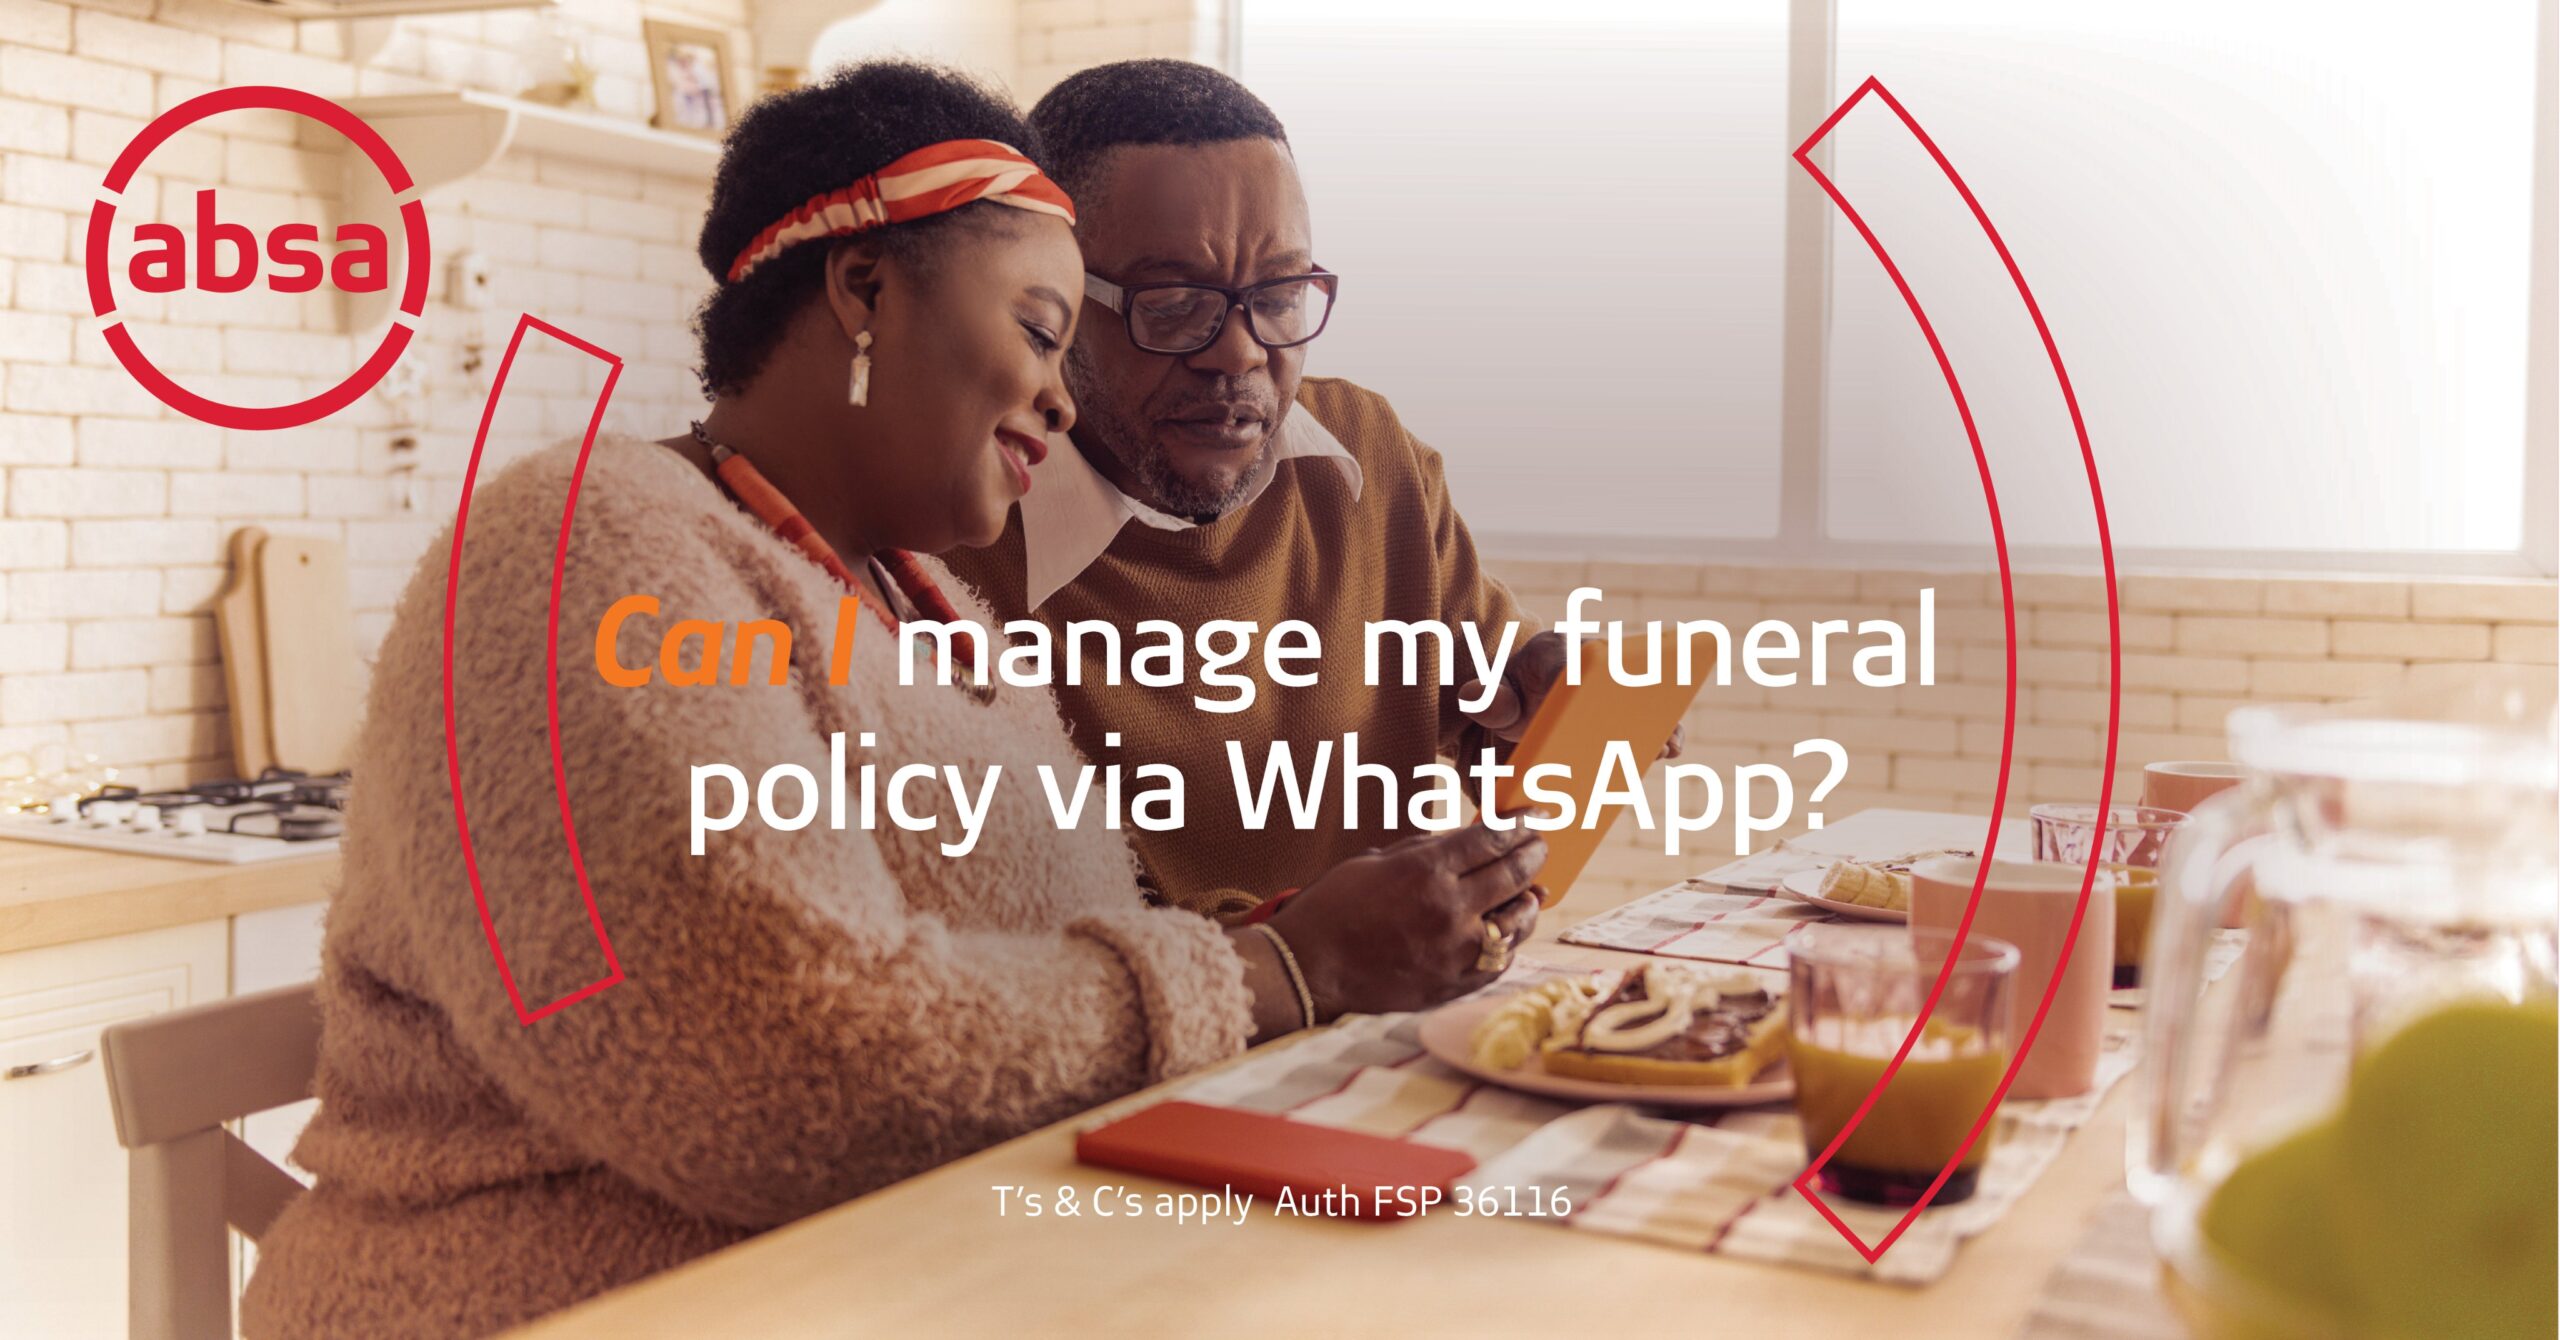 Absa funeral policy